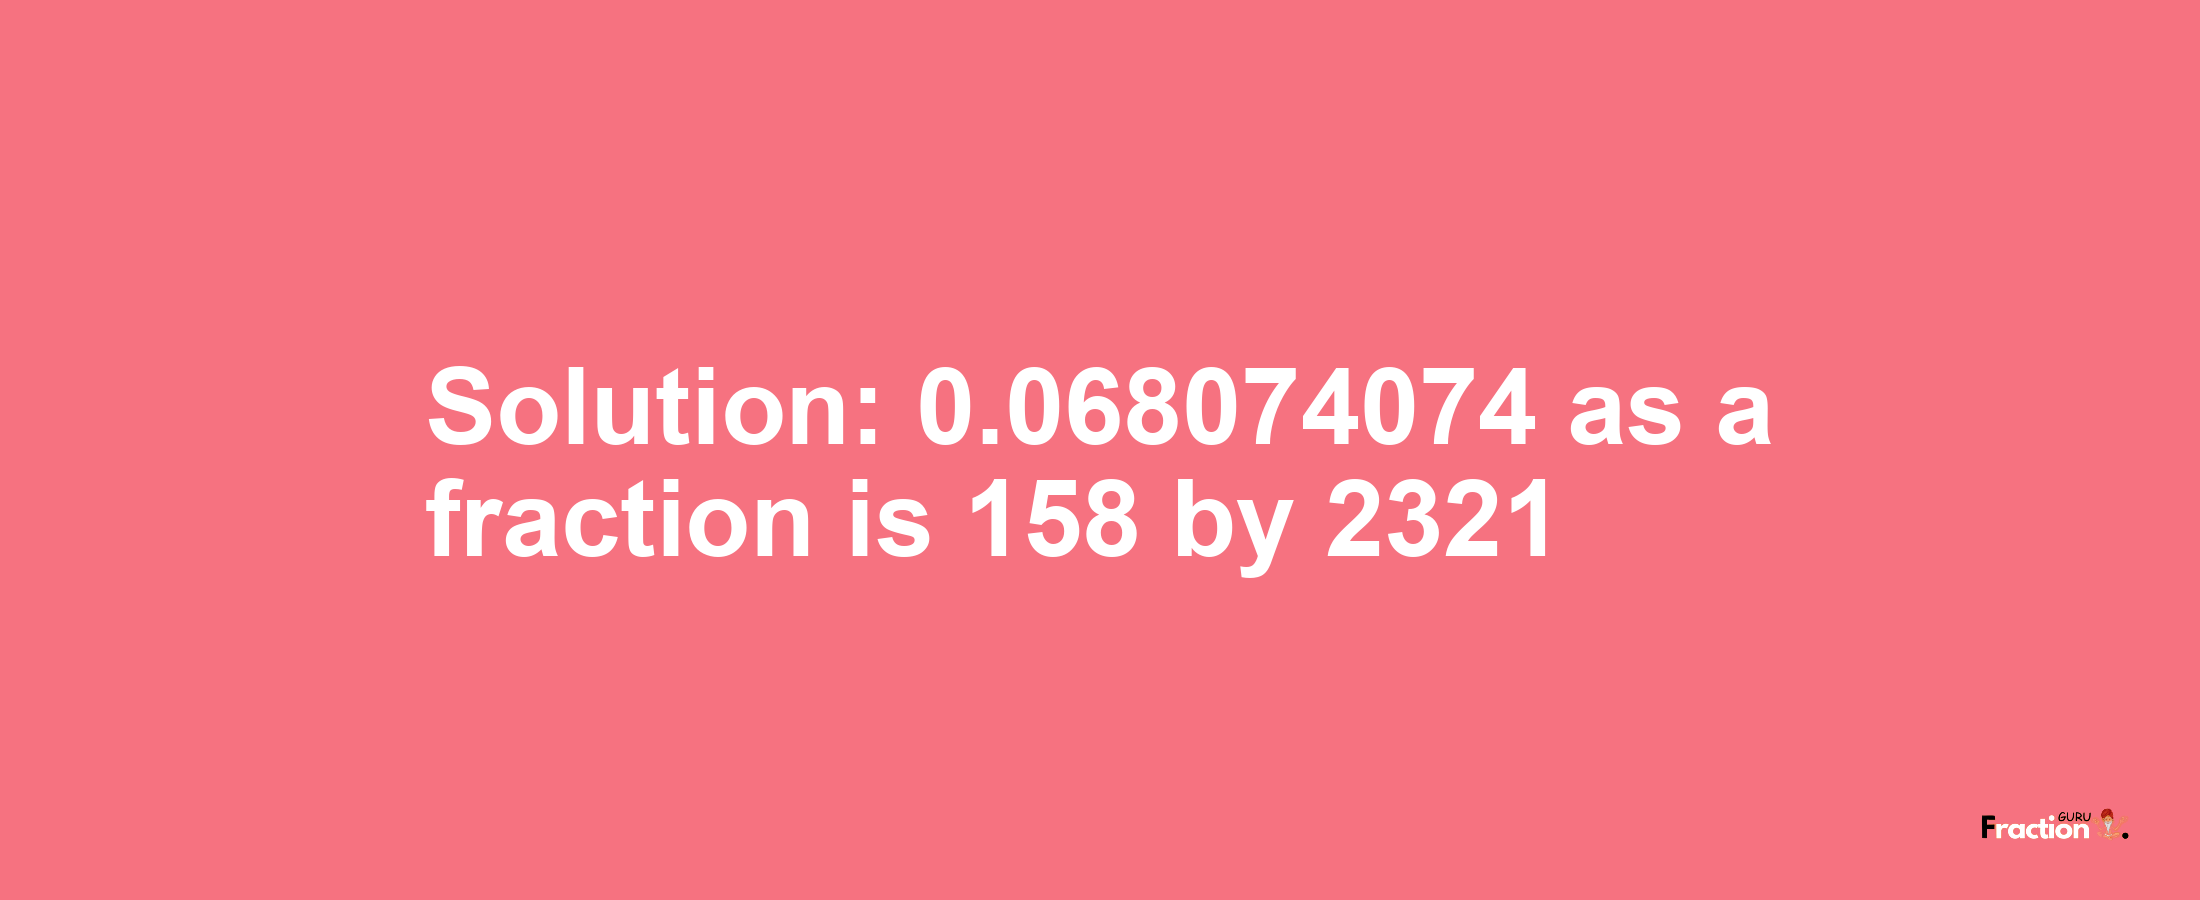 Solution:0.068074074 as a fraction is 158/2321